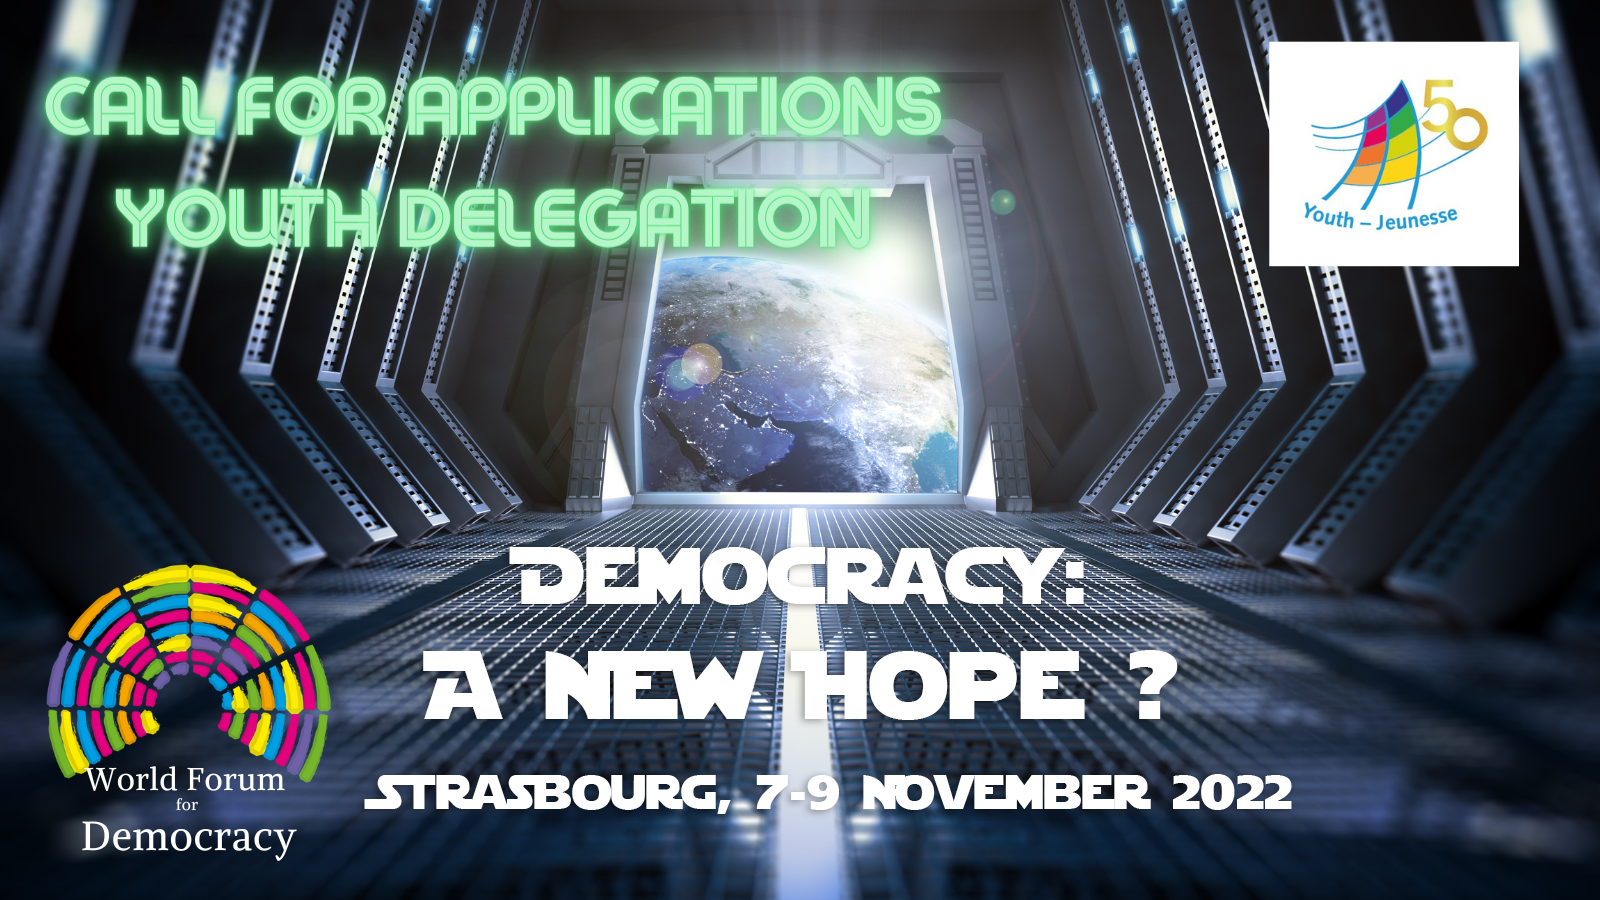 Call for applications: World Forum for Democracy 2022 - Youth Delegation